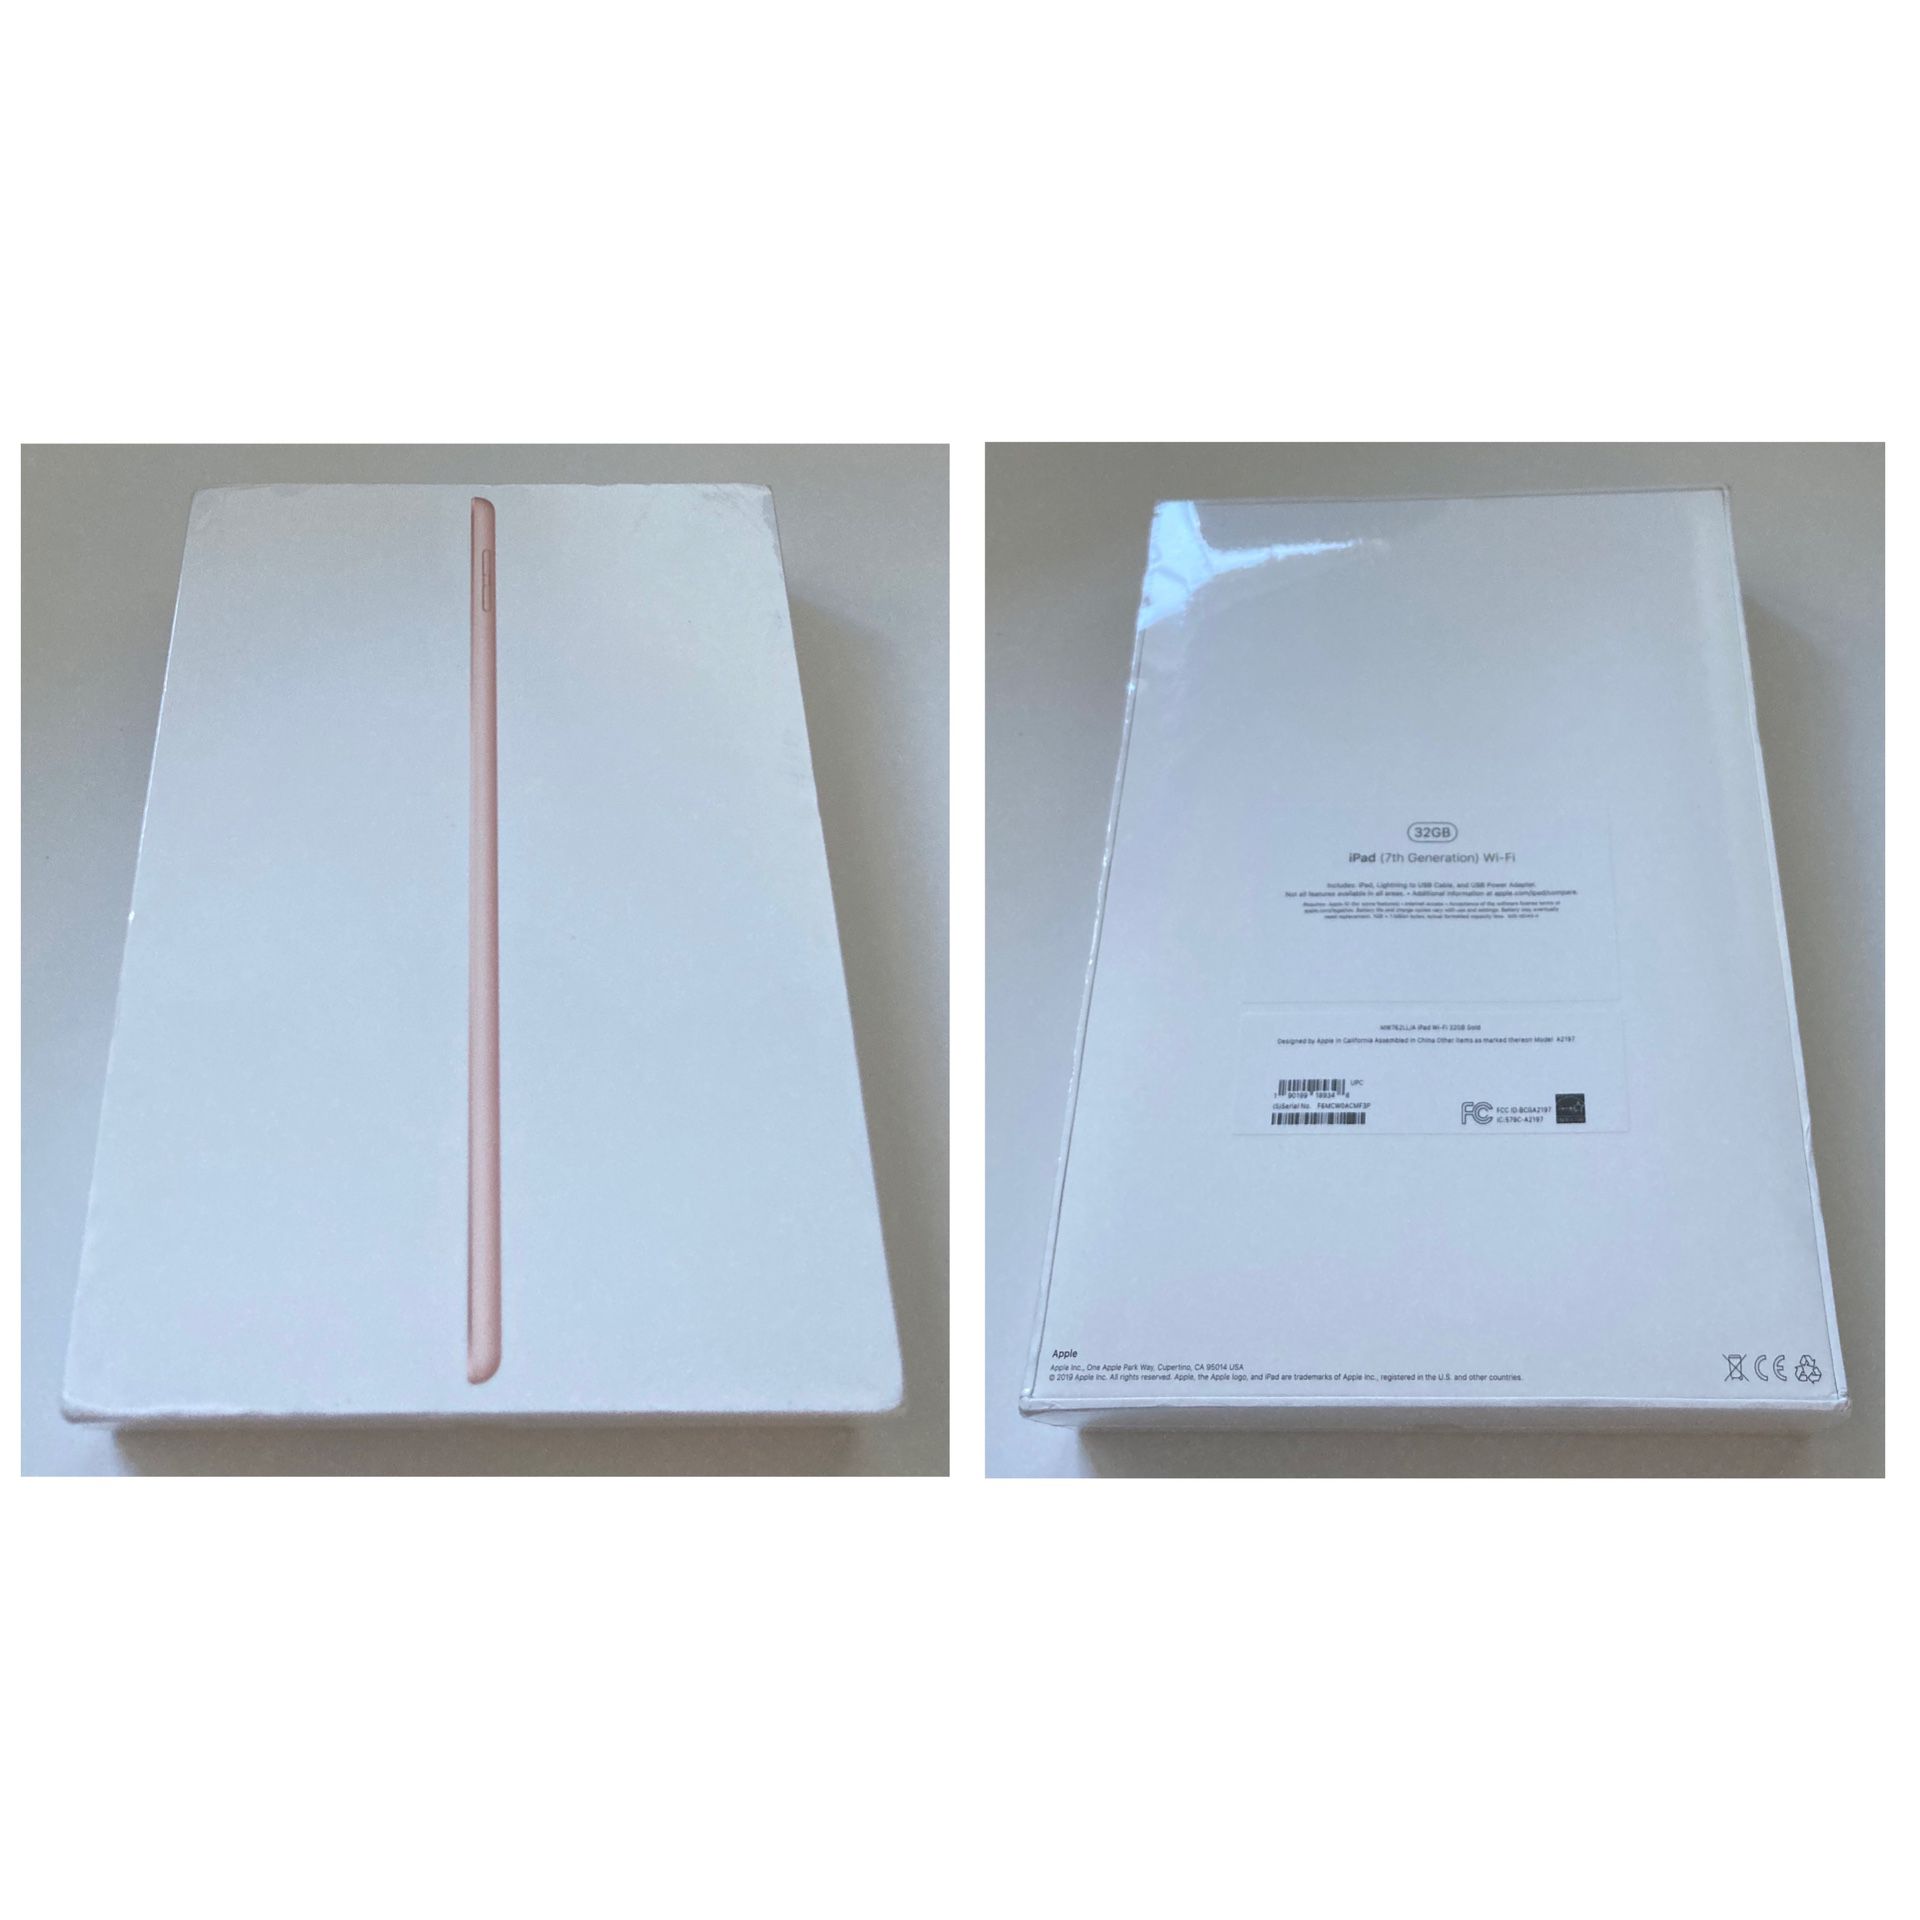 iPad 7th Generation WiFi 32GB Gold (Brand New in the box with 1 year of Apple Warranty) $325